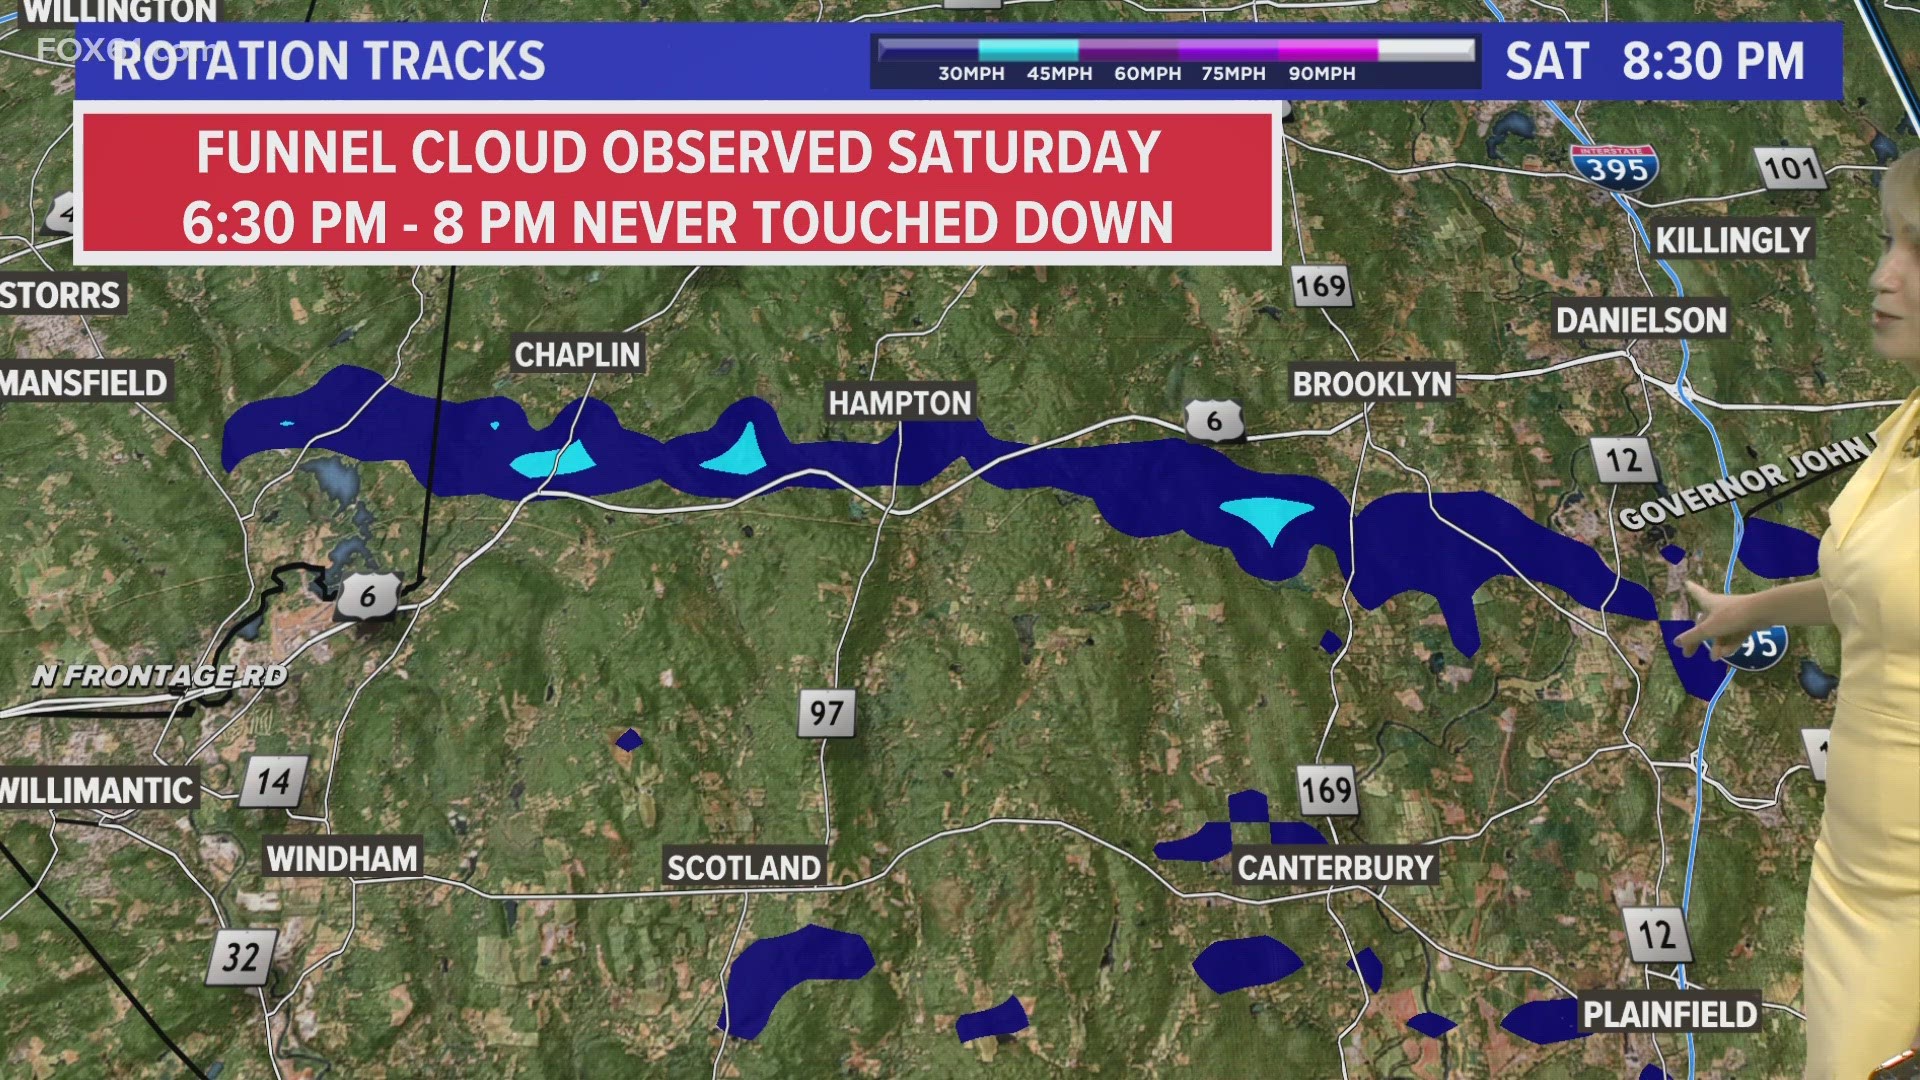 The National Weather Service (NWS) backtracked and said that a tornado did not touch down in eastern Connecticut over the weekend. Instead, it was a funnel cloud.